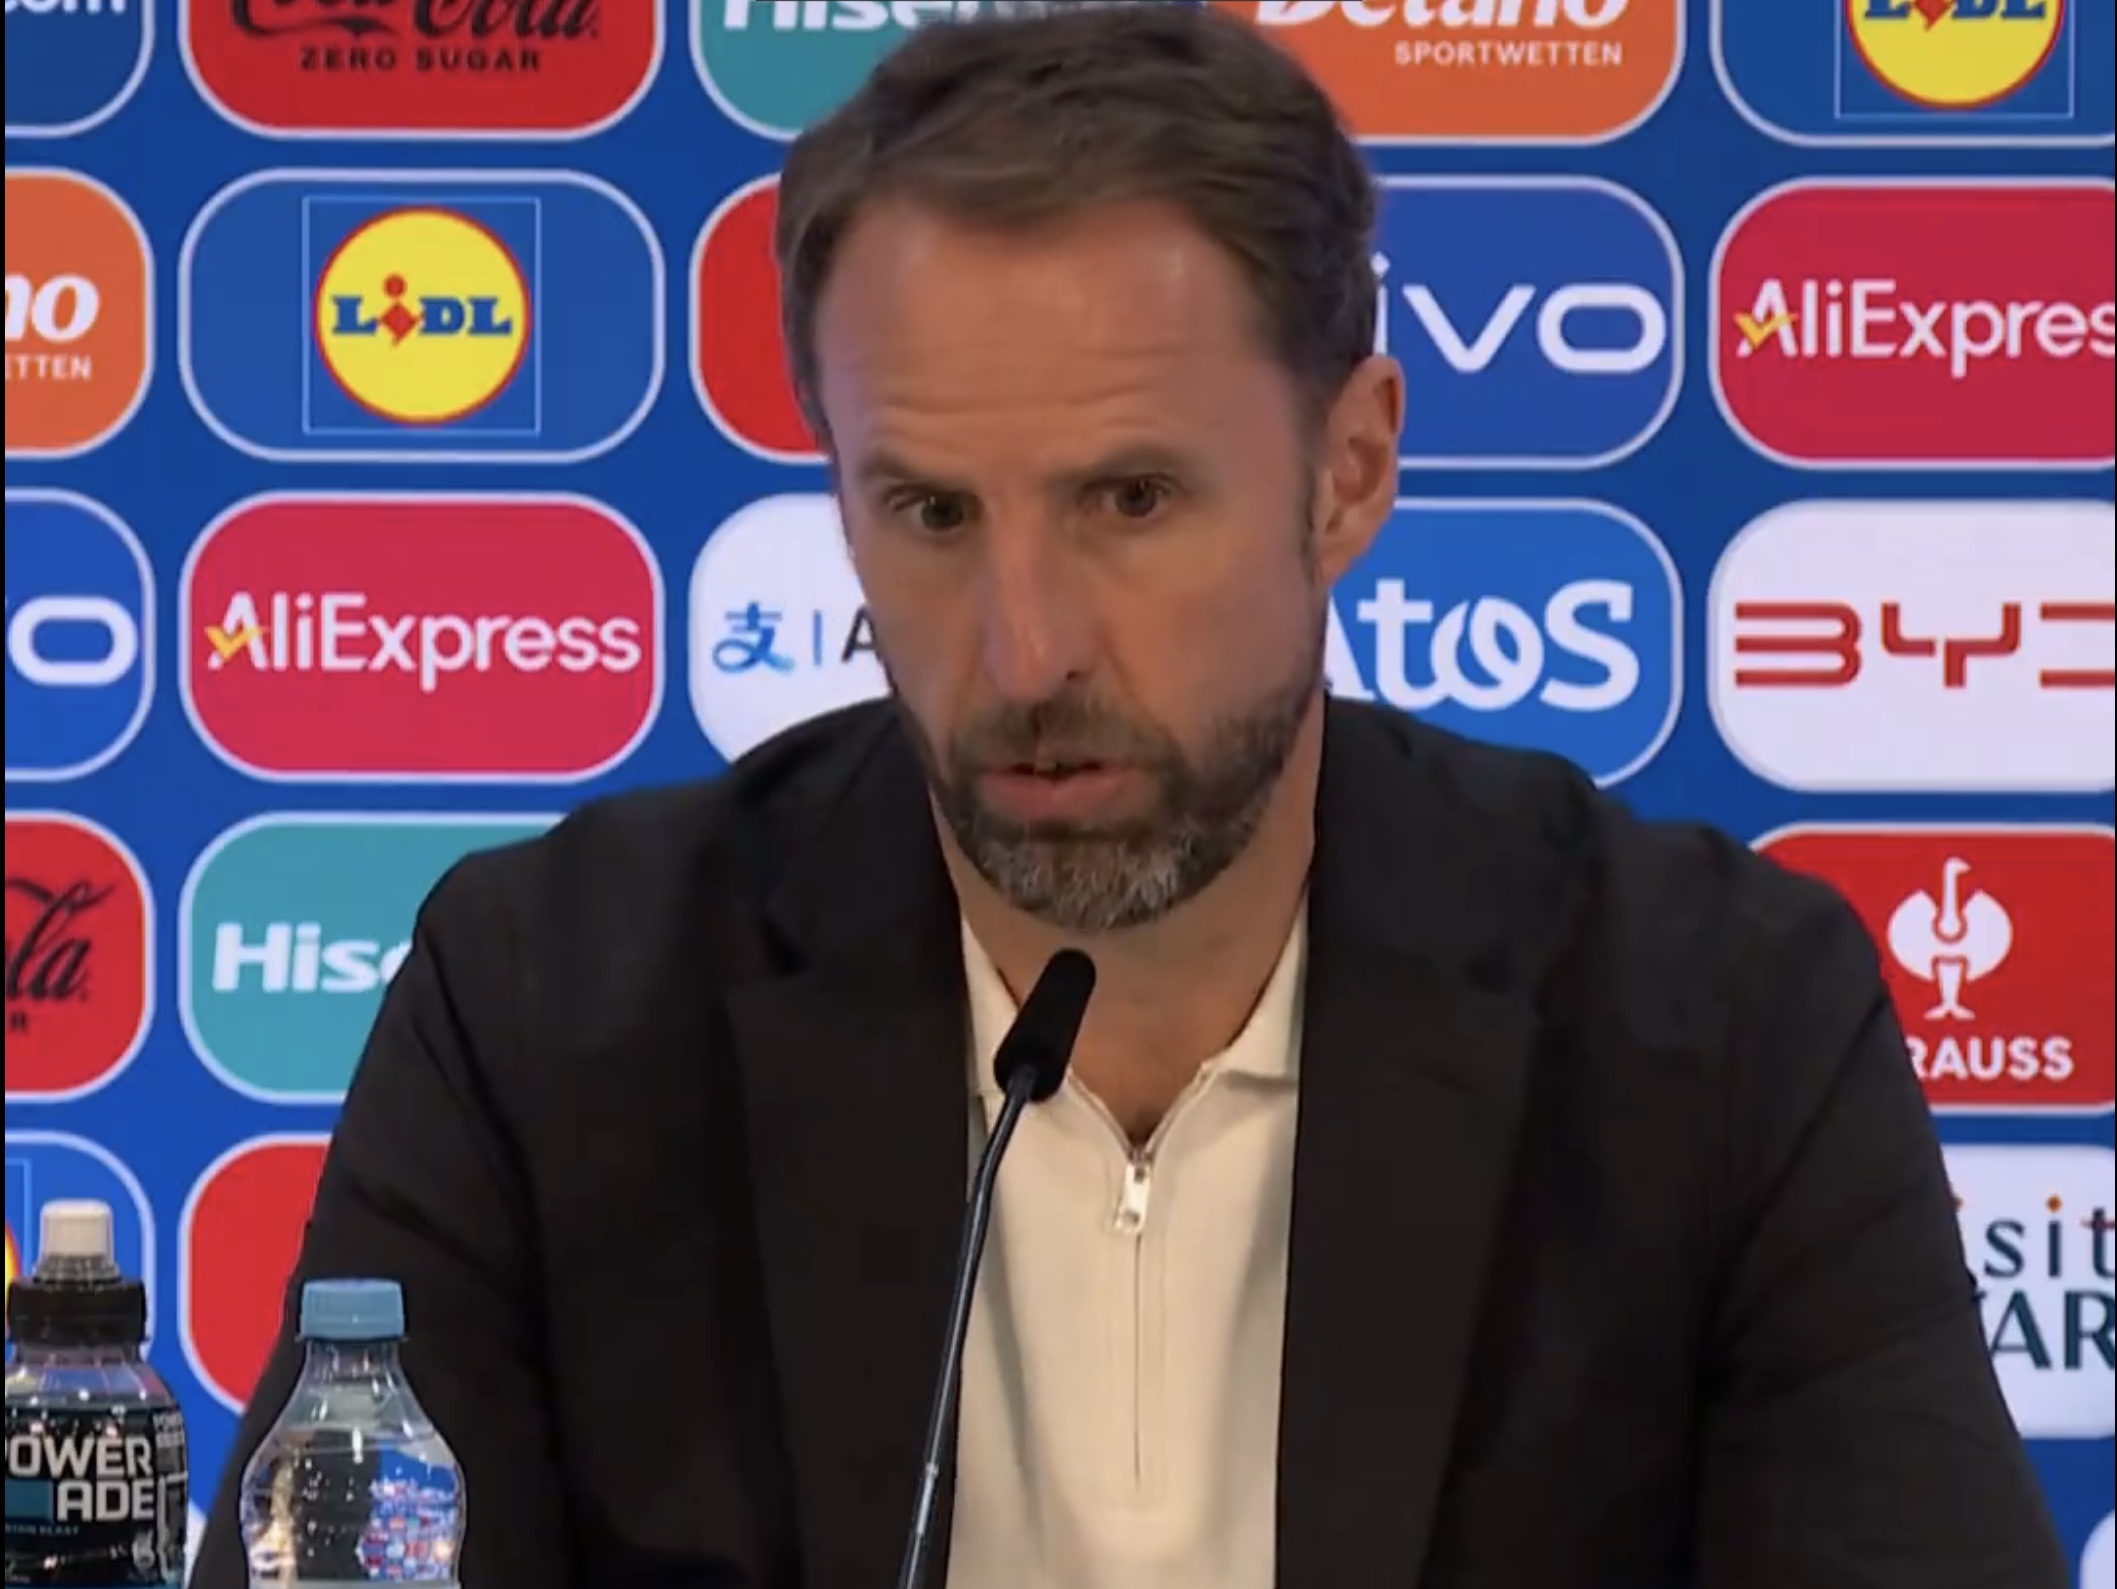 Gareth Southgate insists England aren’t hiding or making excuses ahead of Slovenia game